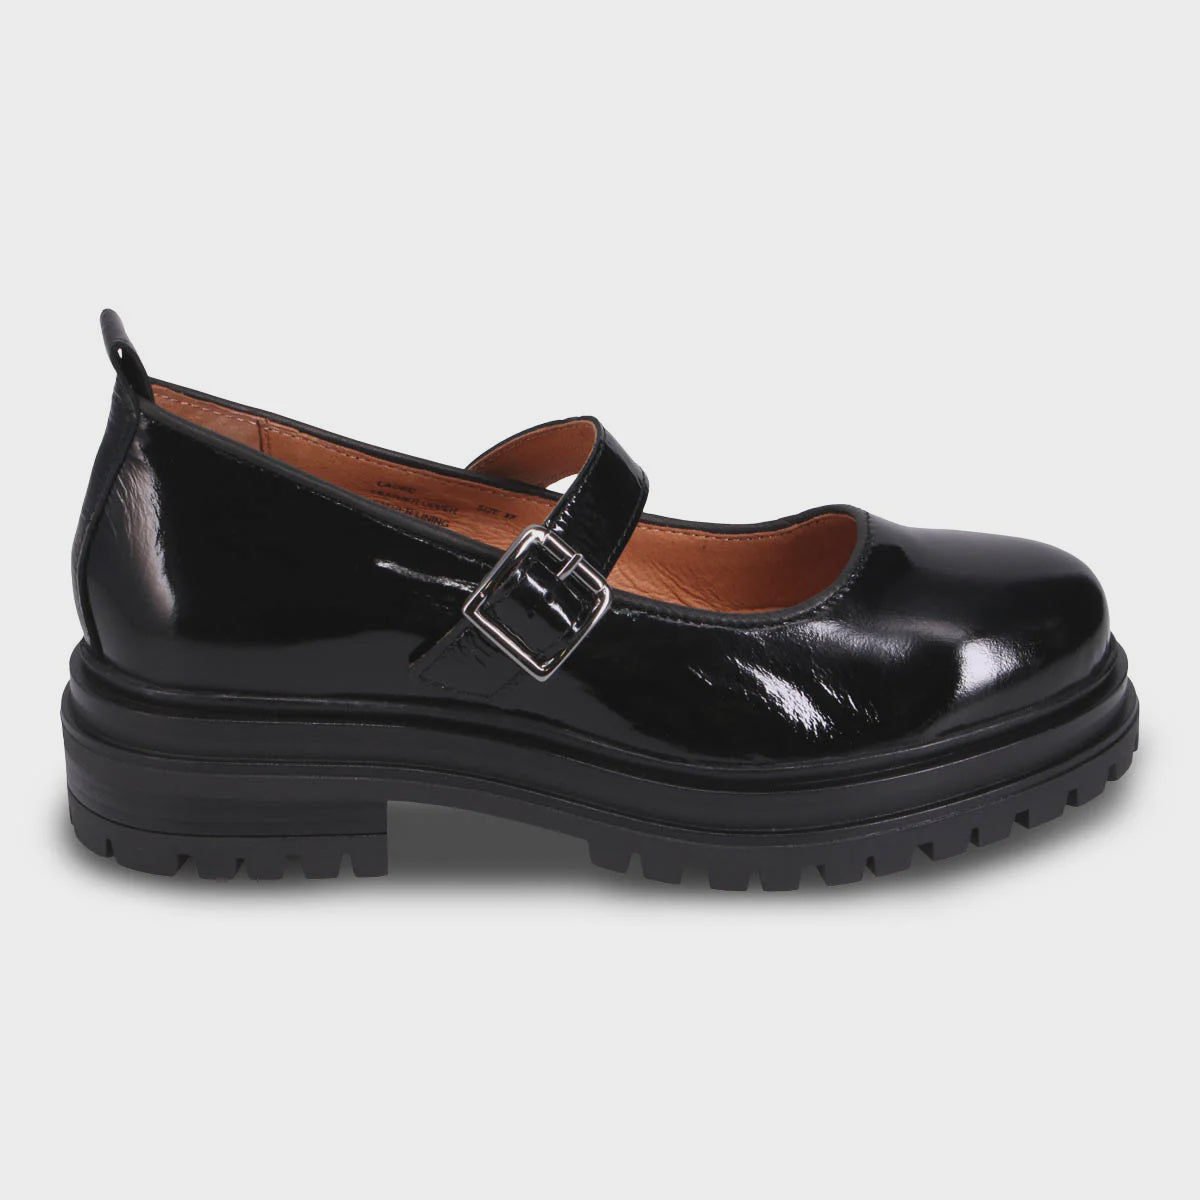 MIZ MOOZ - LACEE MARY-JANE LOAFER IN BLACK PATENT LEATHER